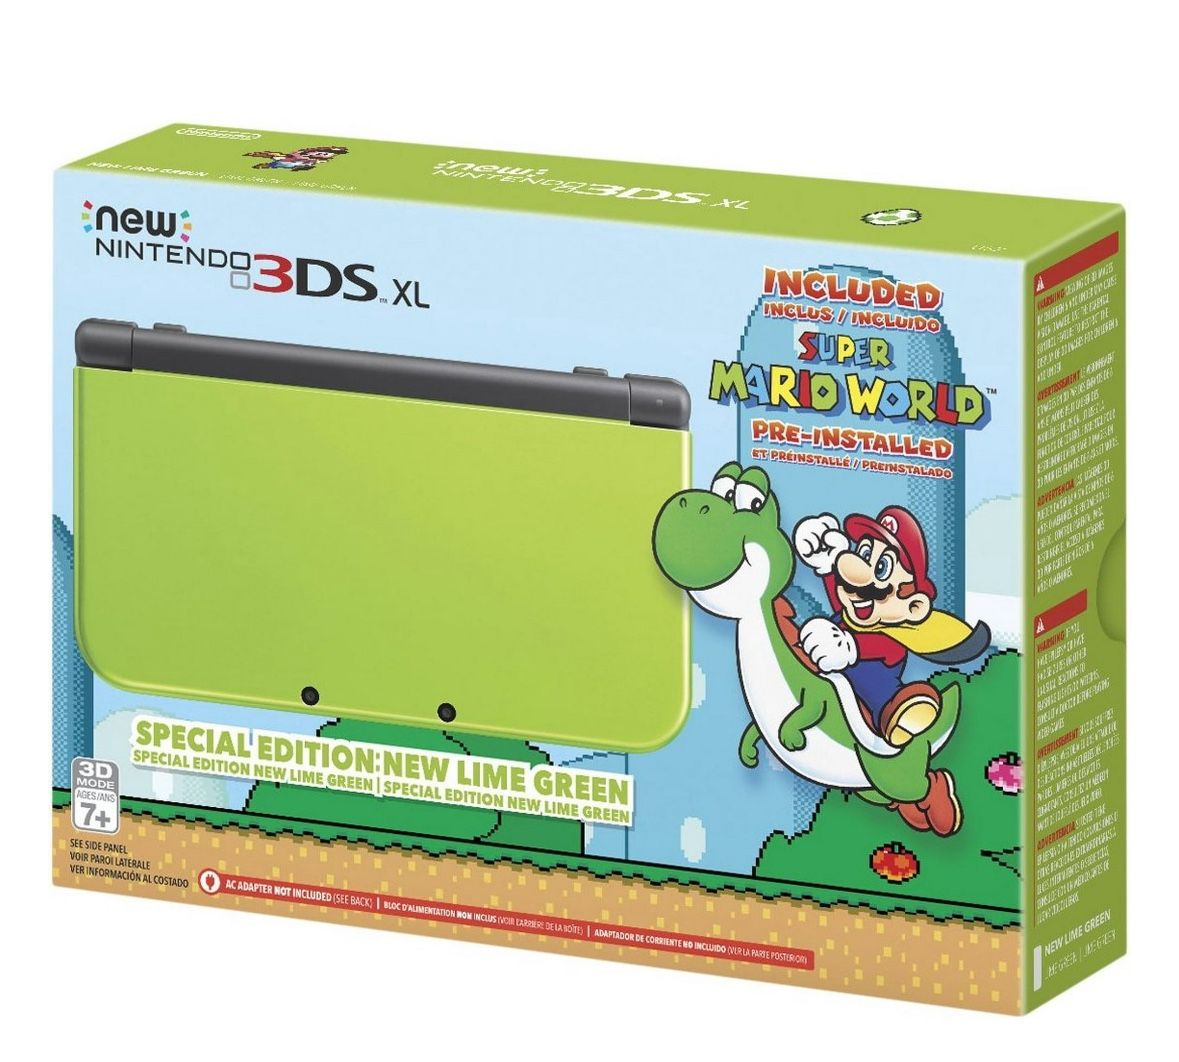 Nintendo 3DS XL Special Edition: Lime Green with Super Mario World Game System